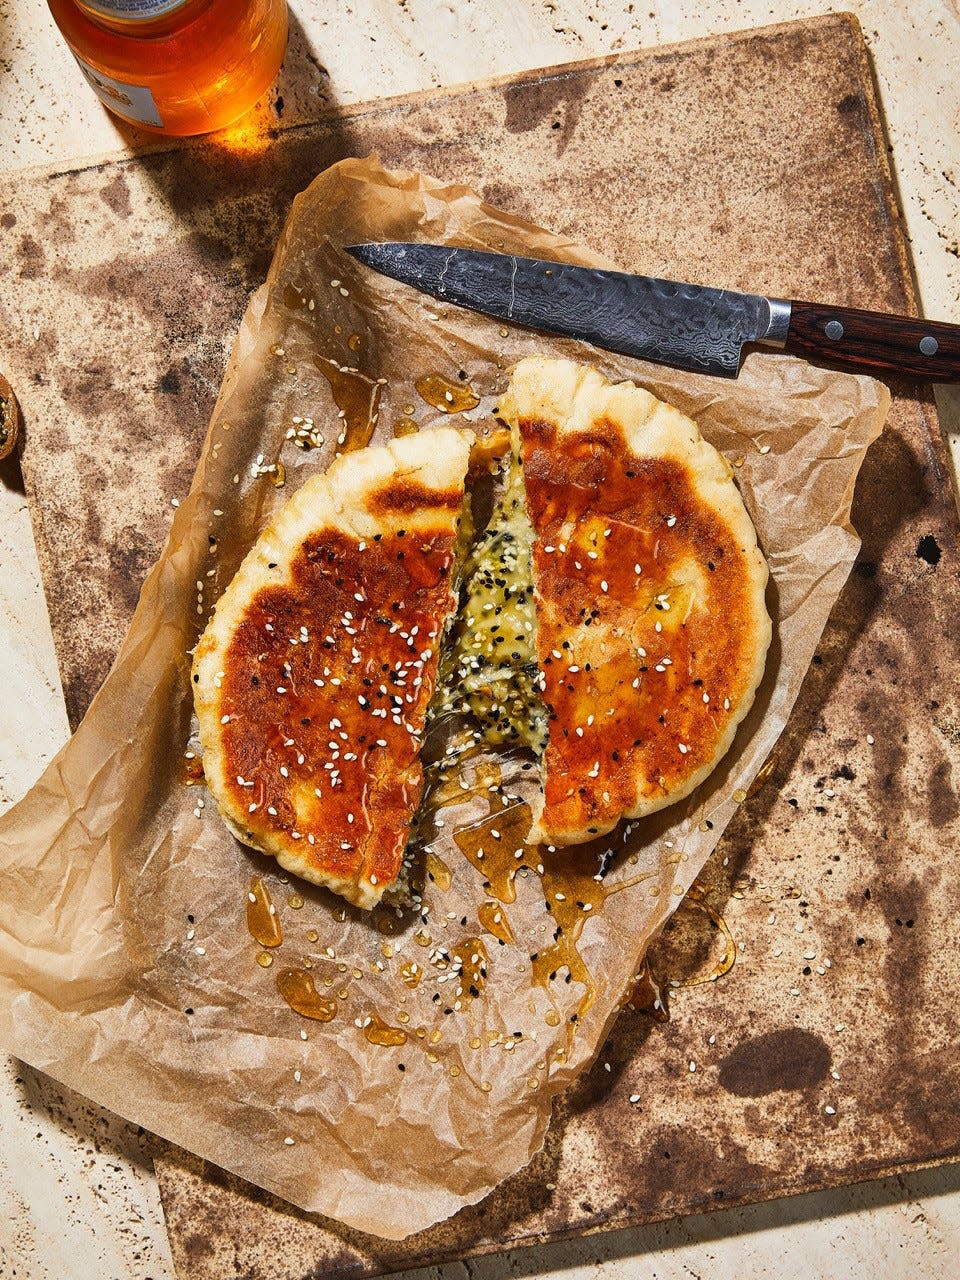 Top Chef Canada host Eden Grinshpan tells you how to make this Pita Grilled Cheese with Gouda and Honey in her book, "Eating Out Loud: Bold Middle Eastern Flavors for All Day Every Day,"